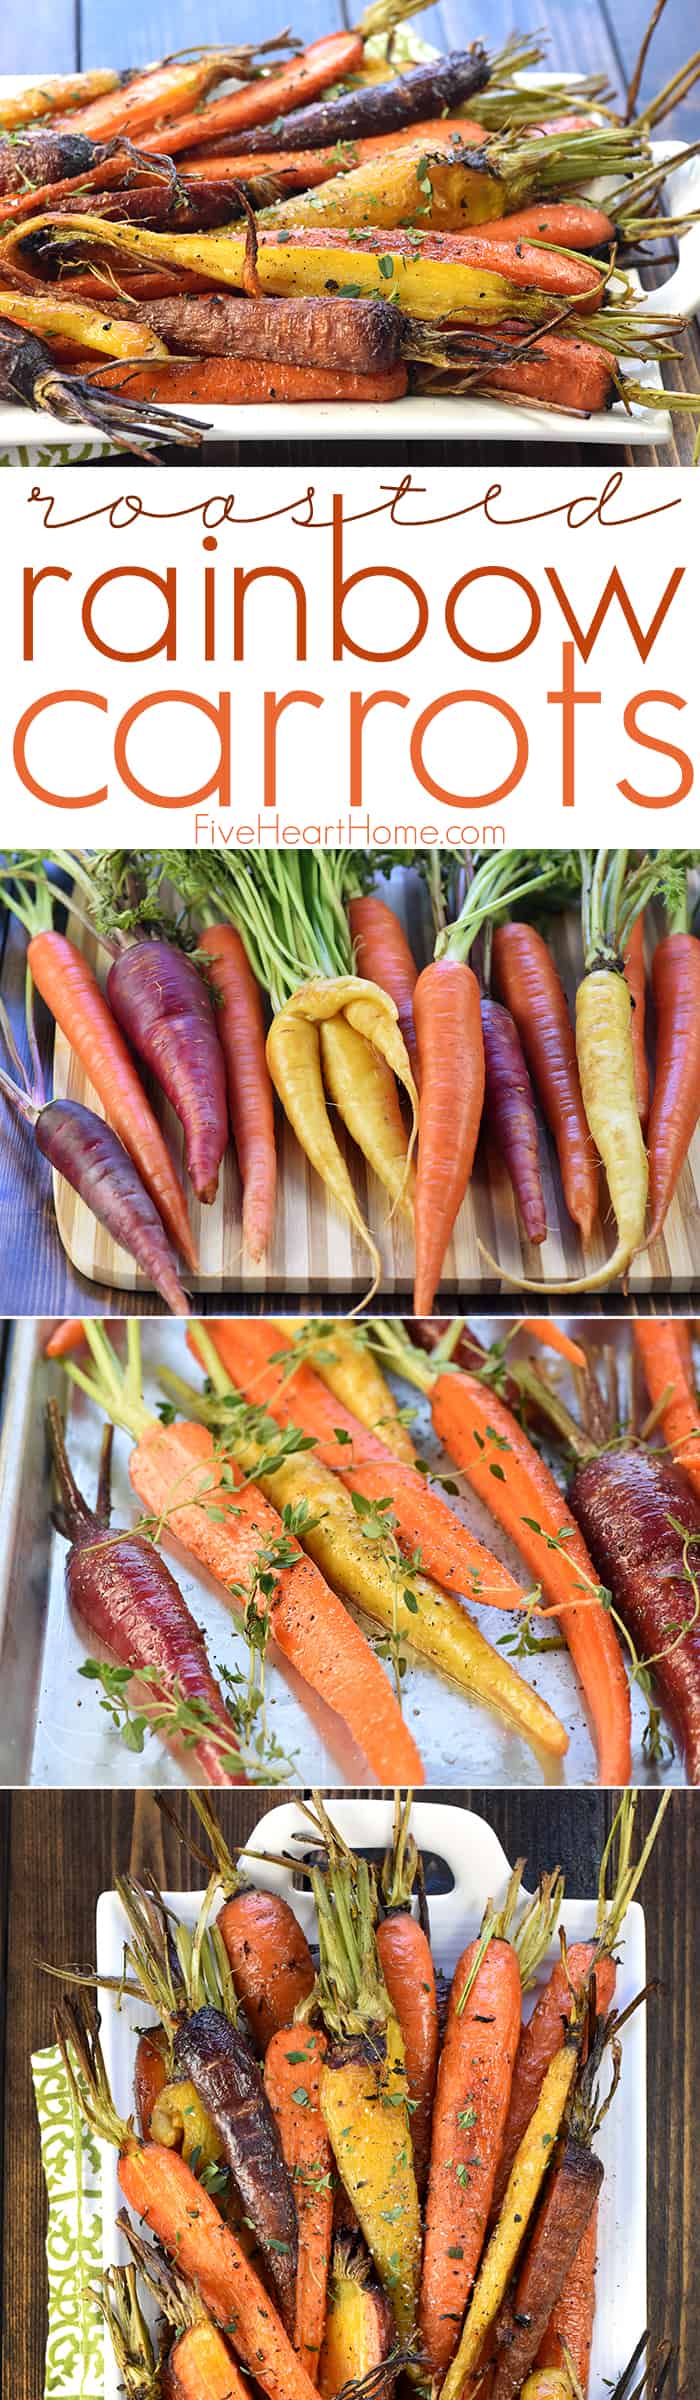 Roasted Rainbow Carrots with Thyme ~ tender and flavorful carrots make a rustic yet vibrant spring or Easter side dish that's as gorgeous as it is delicious! | FiveHeartHome.com via @fivehearthome